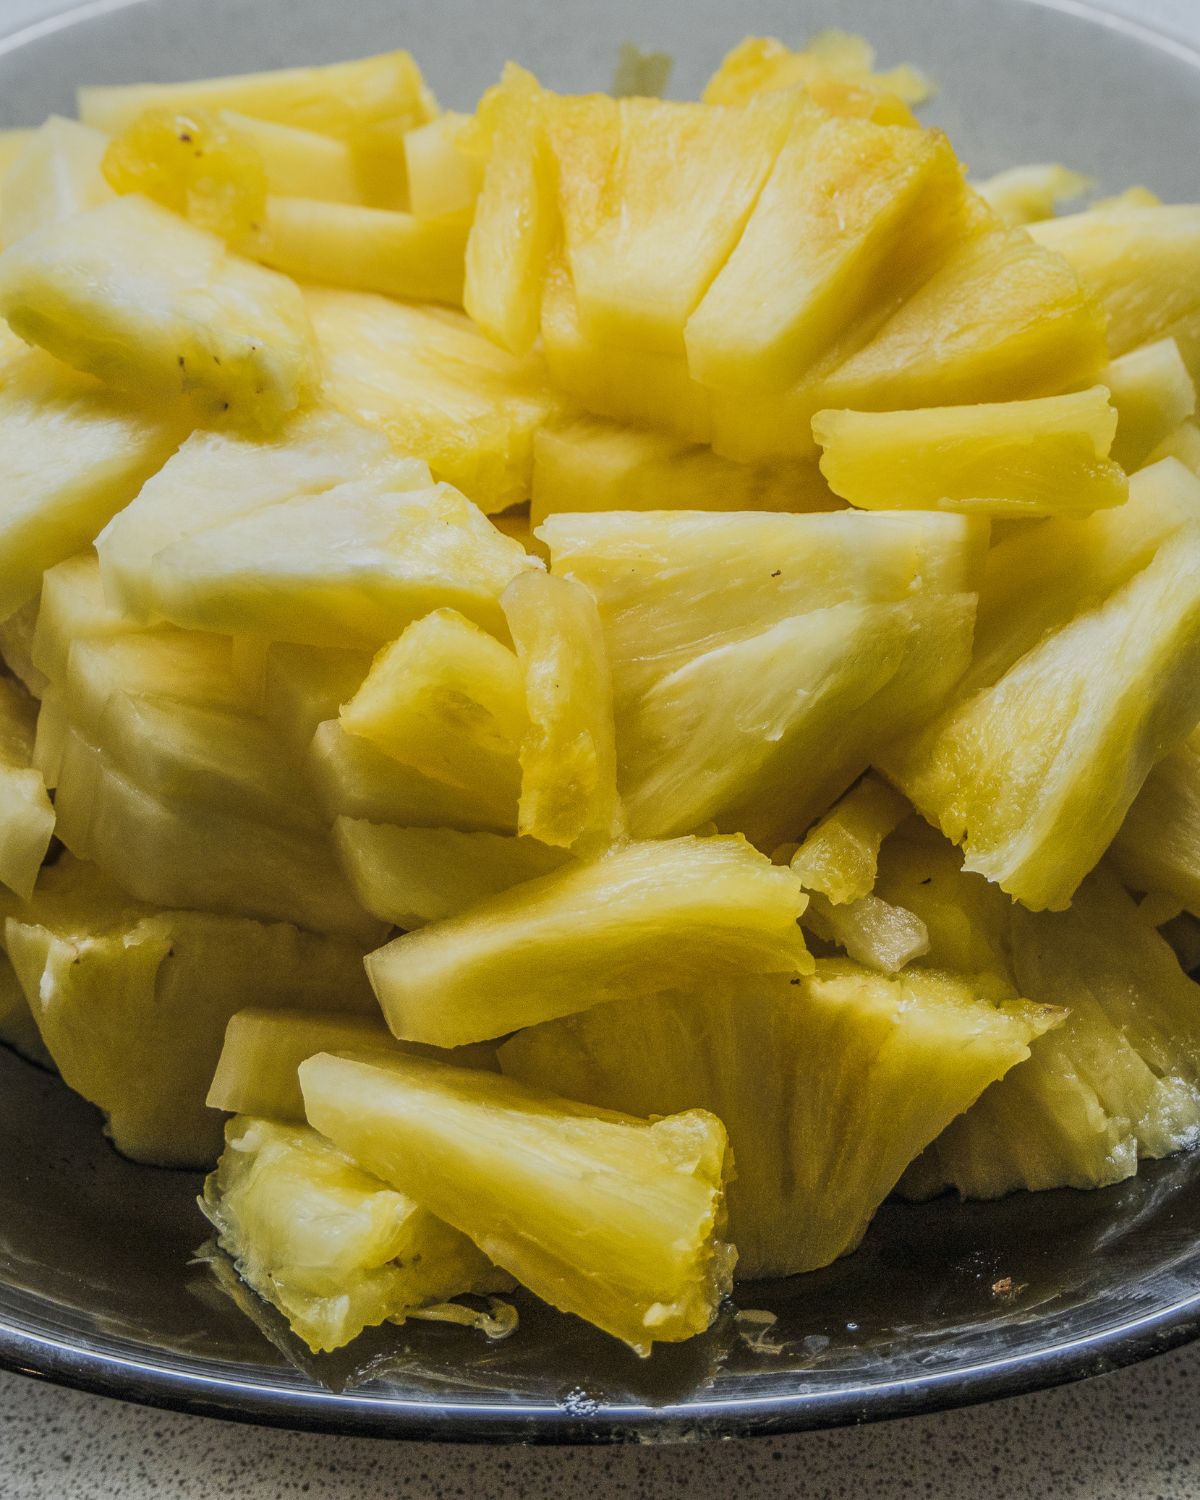 Diced pineapple in close up.